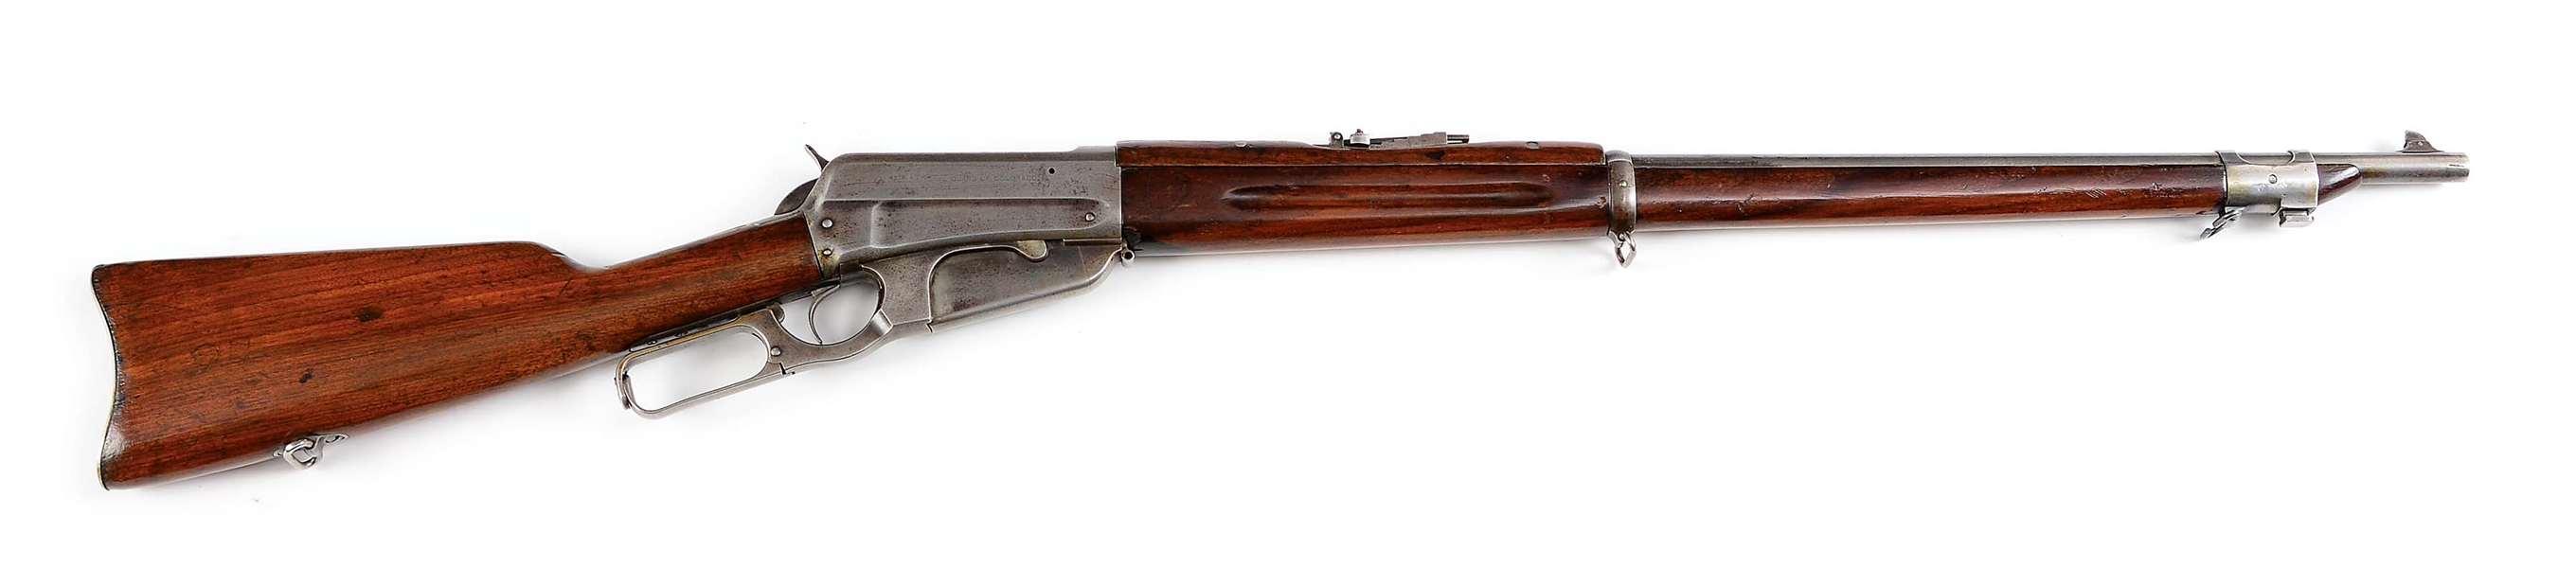 (C) WINCHESTER MODEL 1895 NATIONAL GUARD OF COLORADO MUSKET (1899).